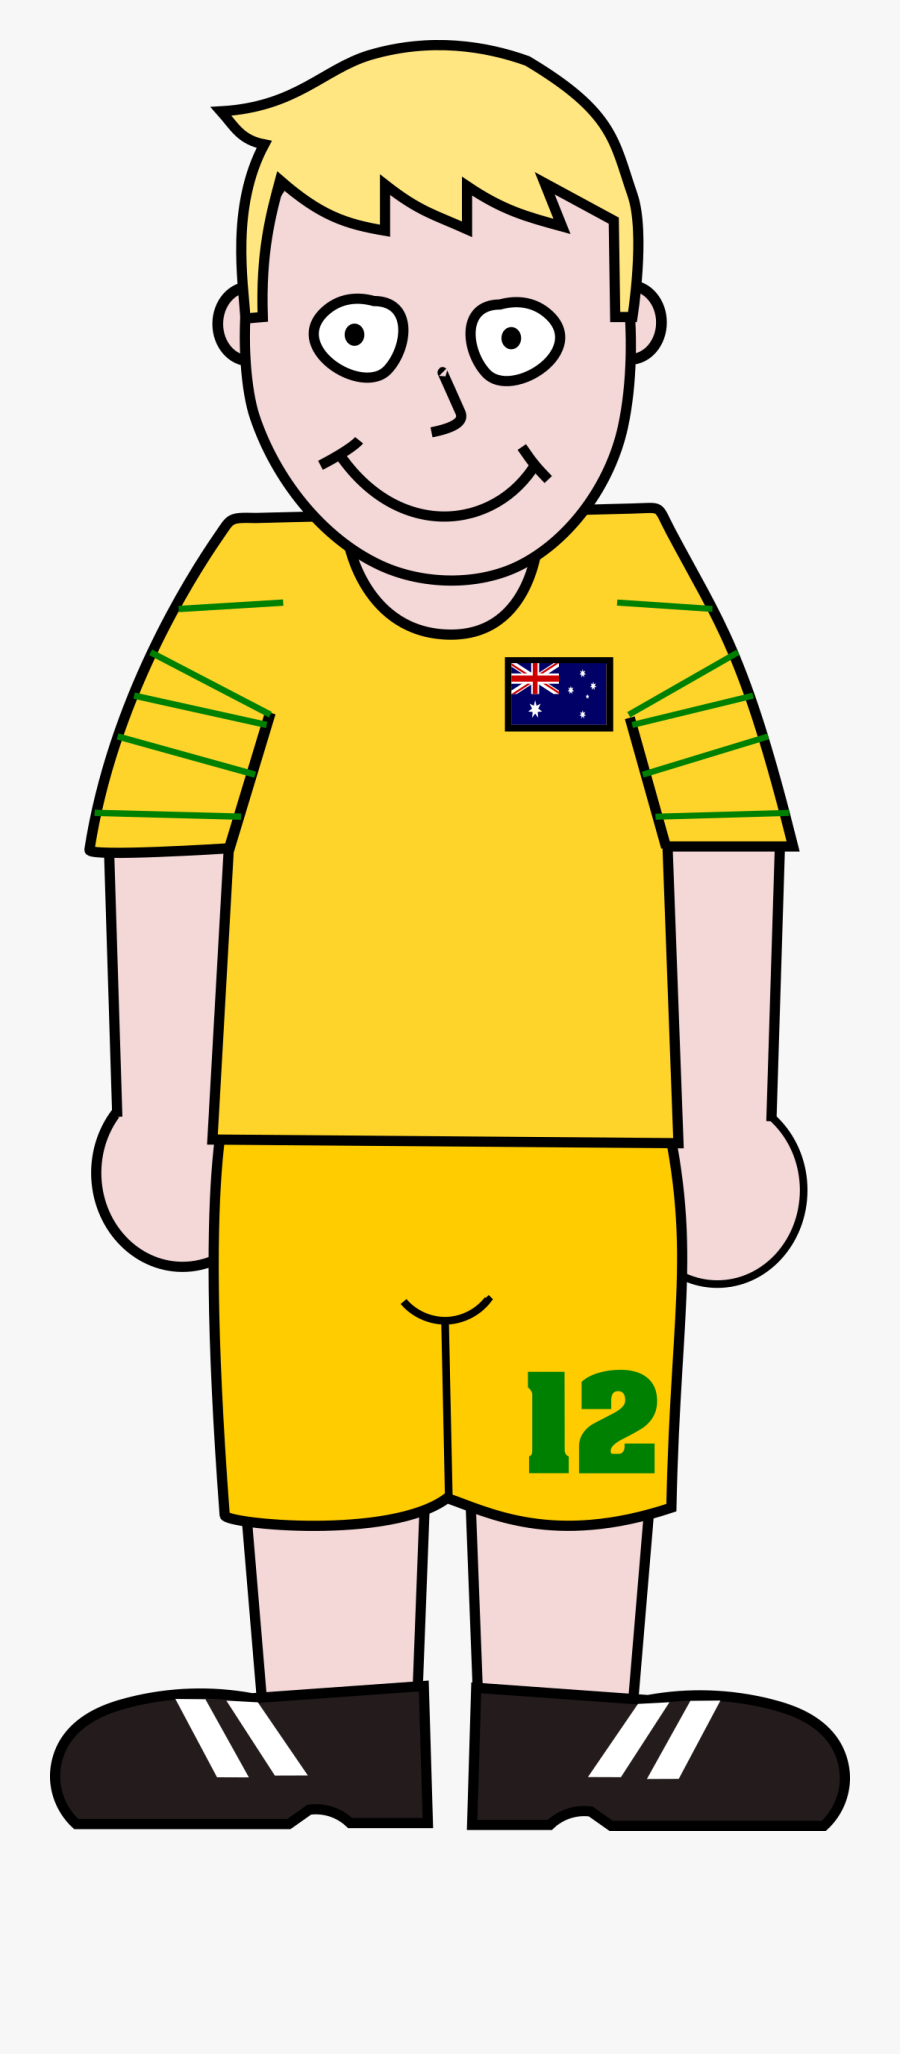 World Cup Soccer Player Clipart Png Transparent Png - Cartoon Soccer Player Standing Clipart, Transparent Clipart